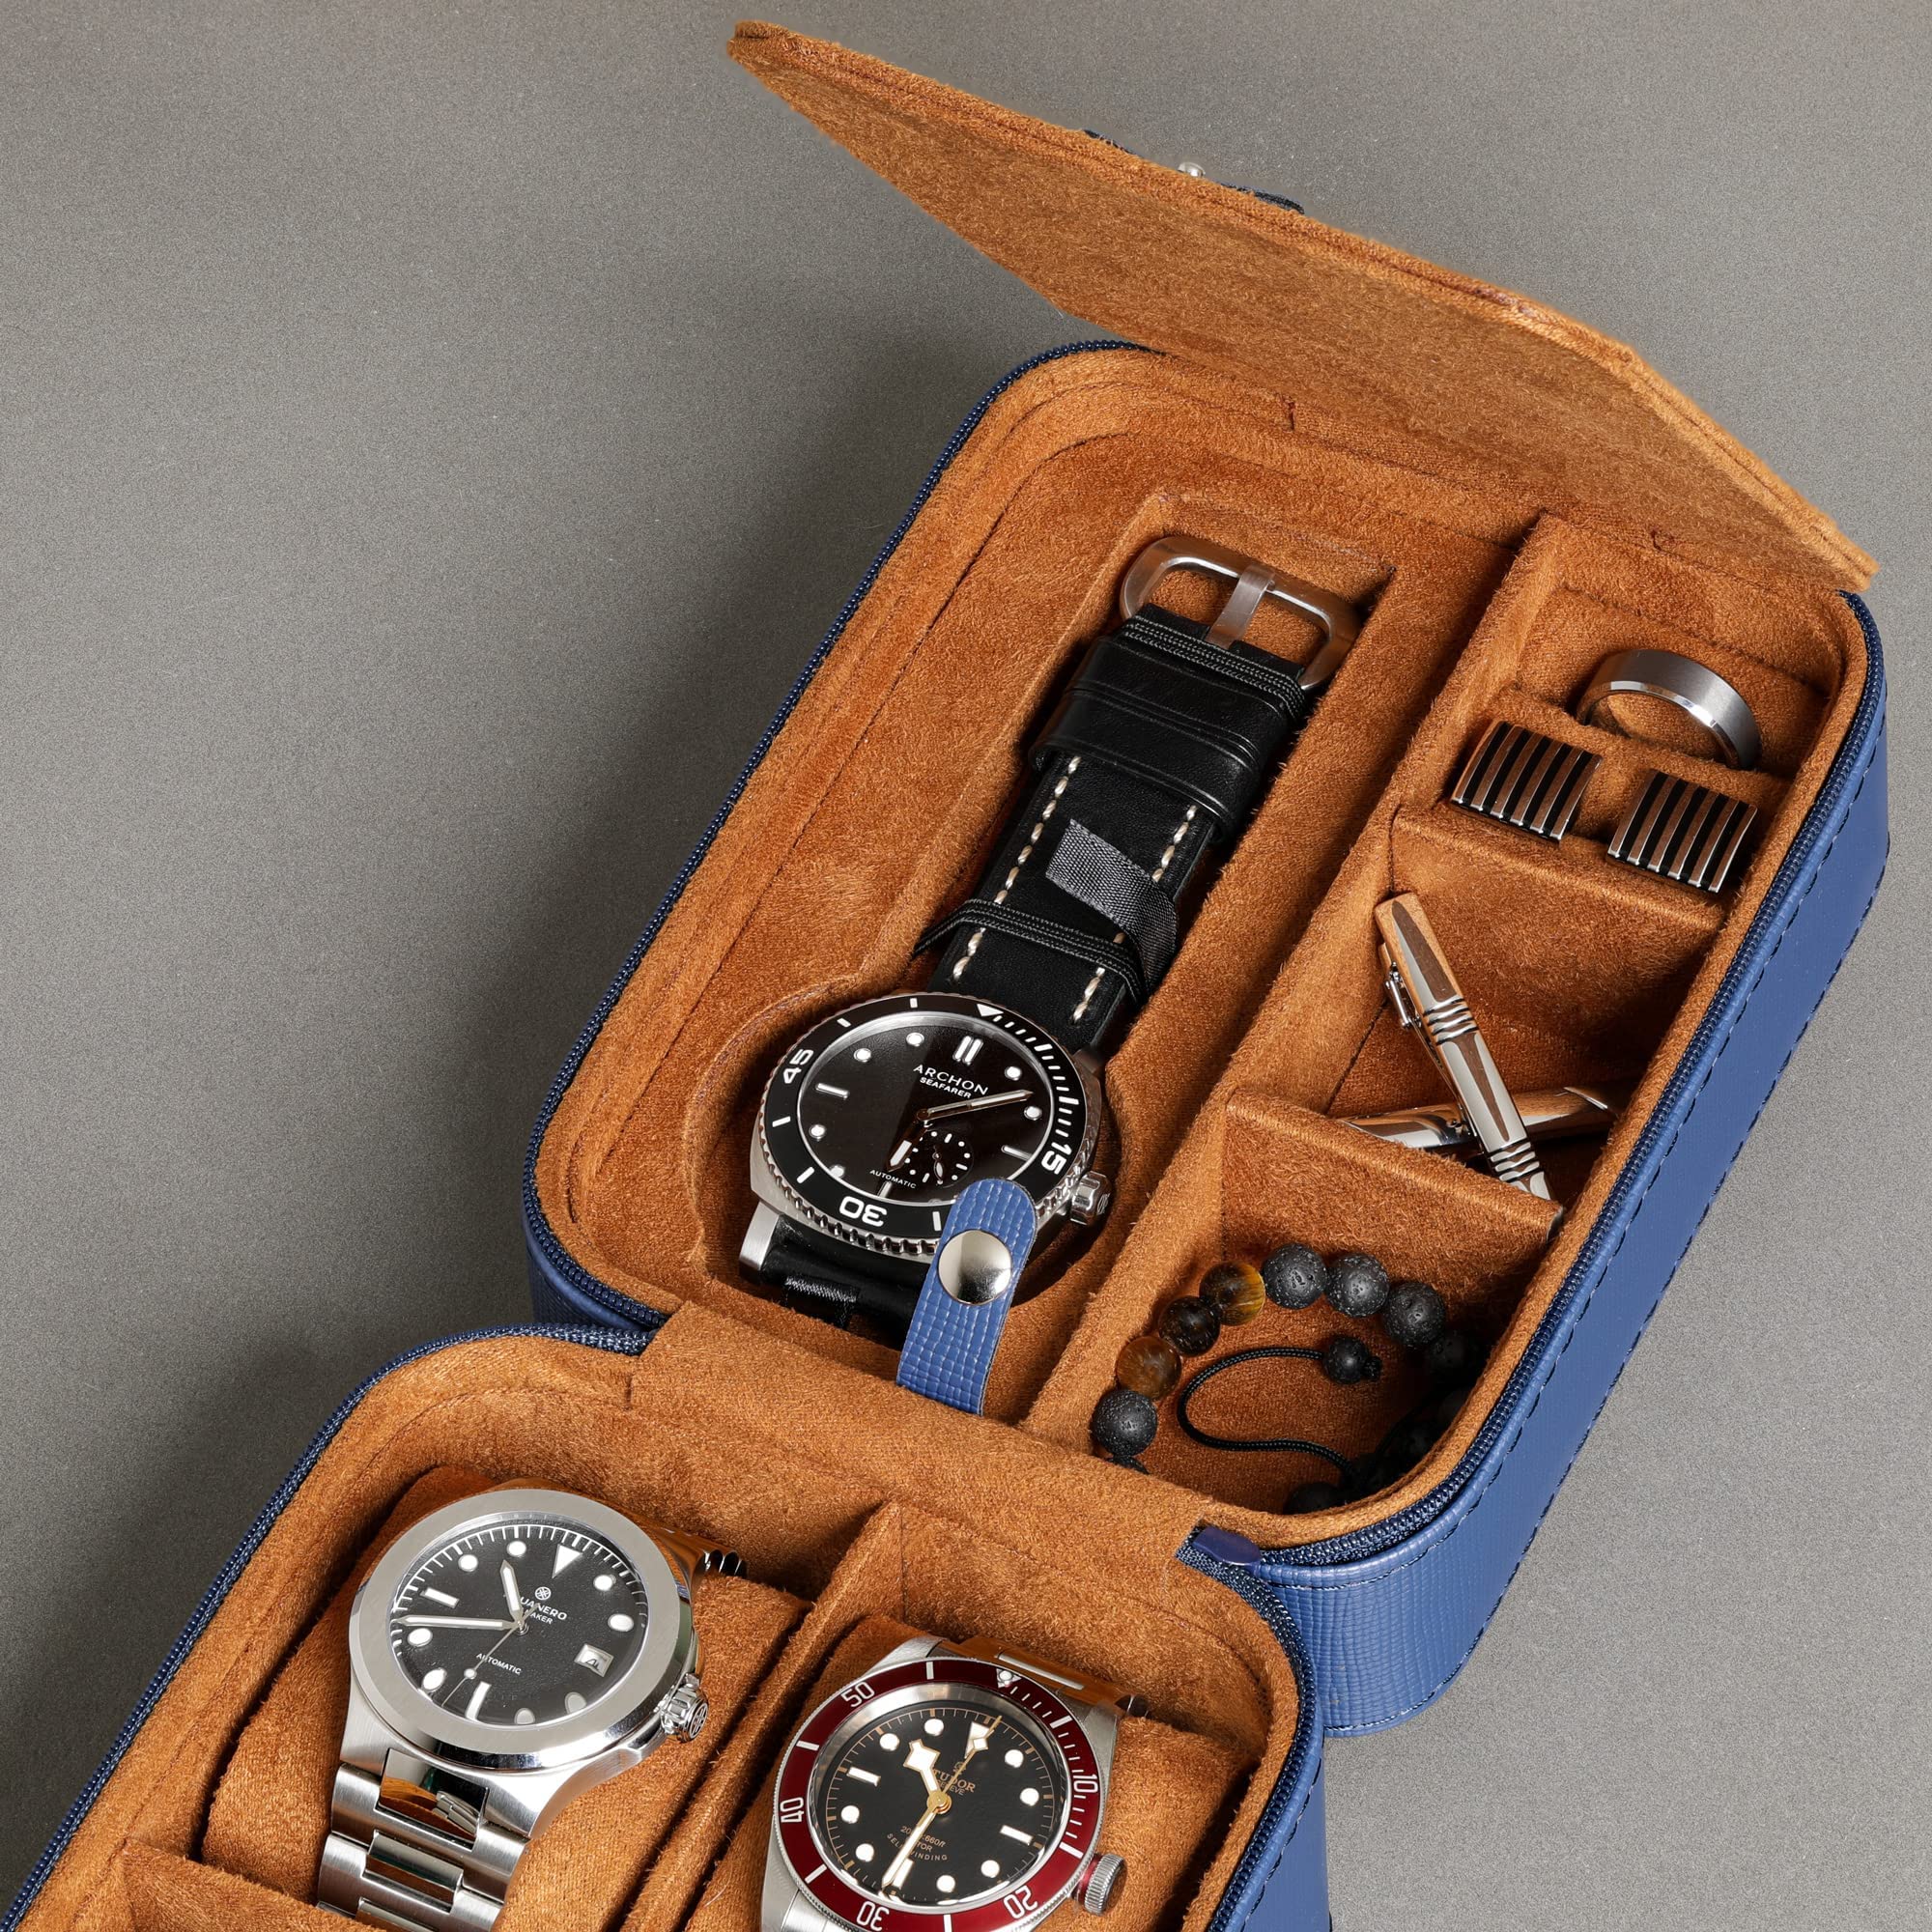 ROTHWELL Gift Set 10 Slot Leather Watch Box & Matching 5 Watch Travel Case - Luxury Watch Case Display Organizer, Locking Mens Jewelry Watches Holder, Men's Storage Boxes Glass Top Blue/Tan